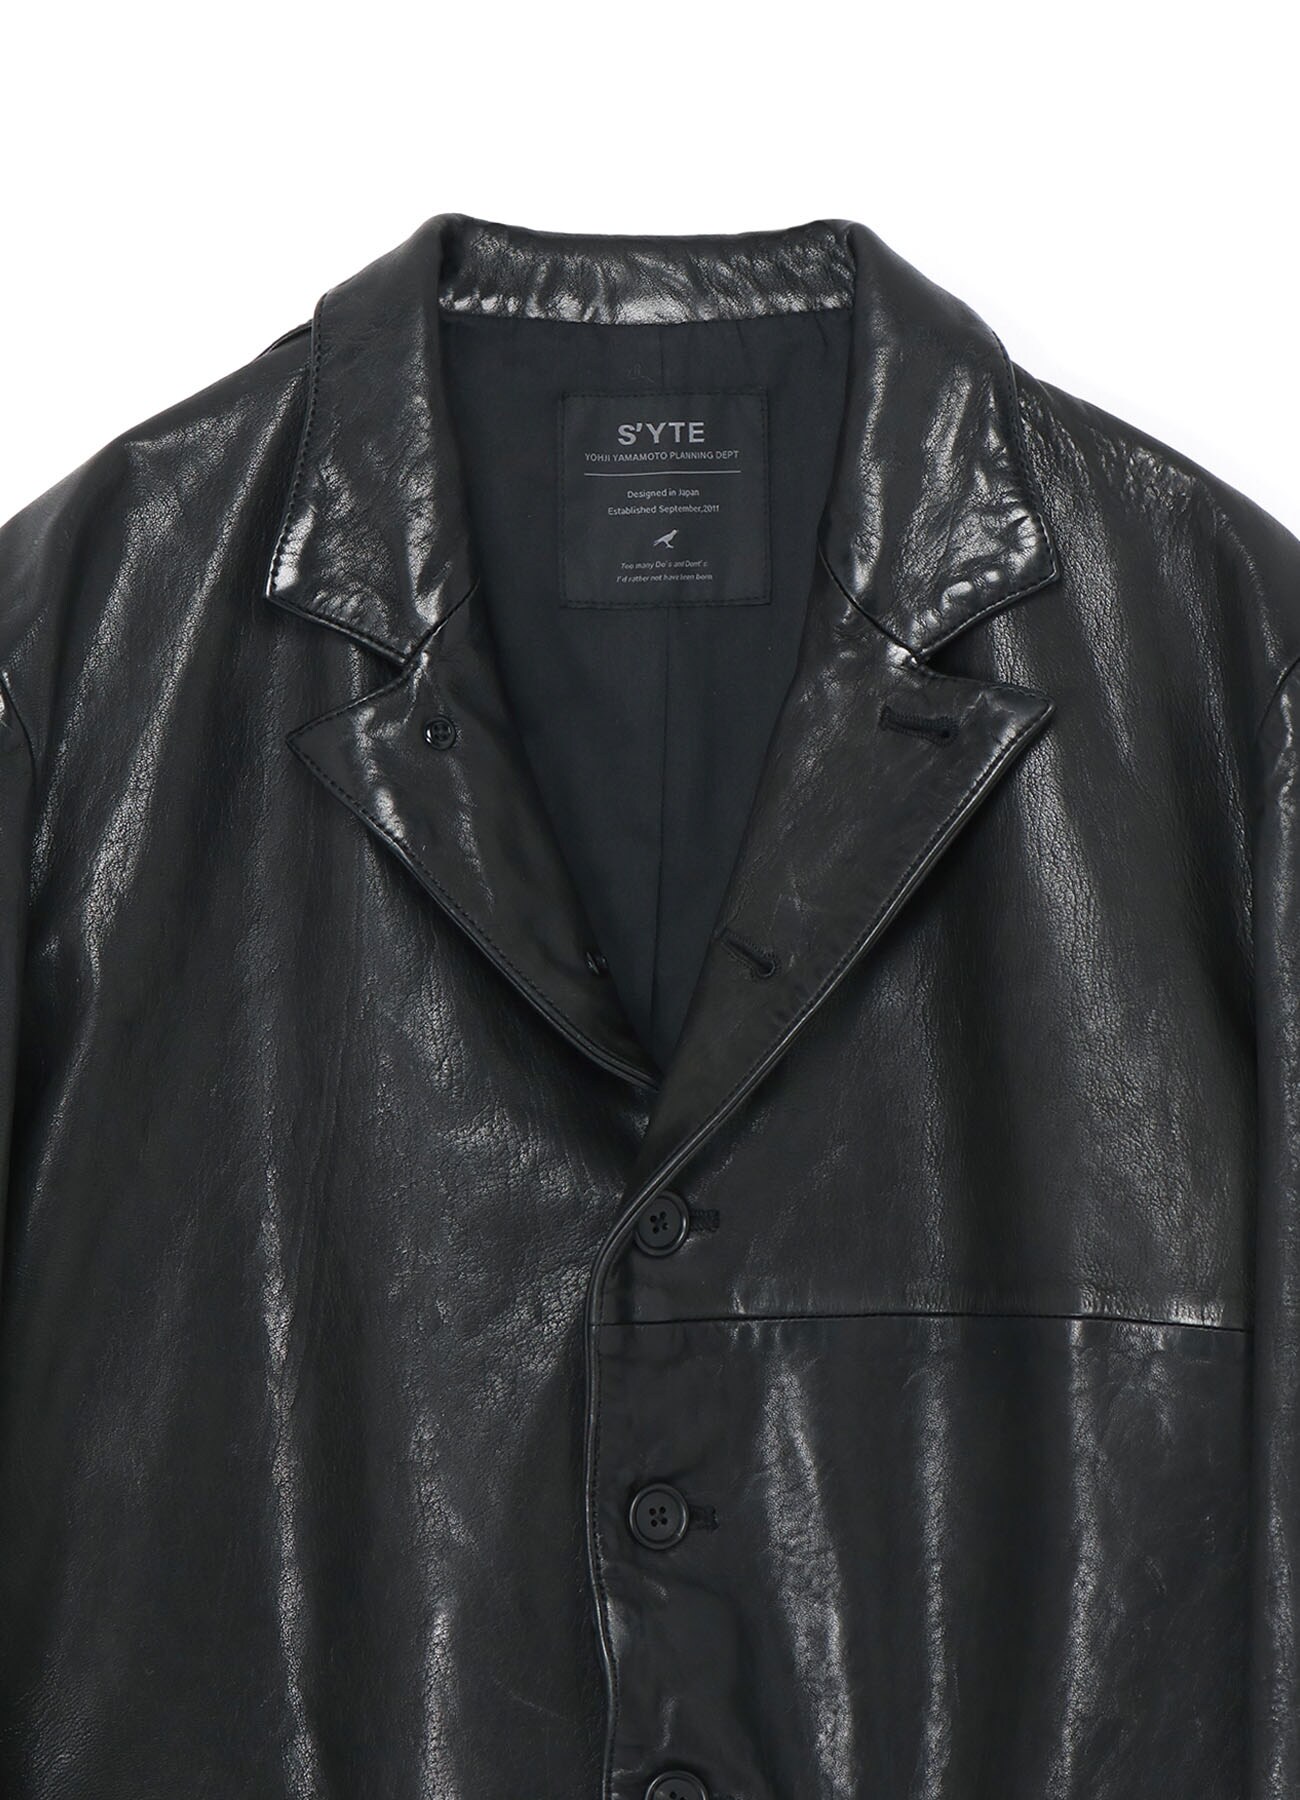 VEGETABLE TANNED AND WASHED SHEEP LEATHER TAILORED JACKET(M Black